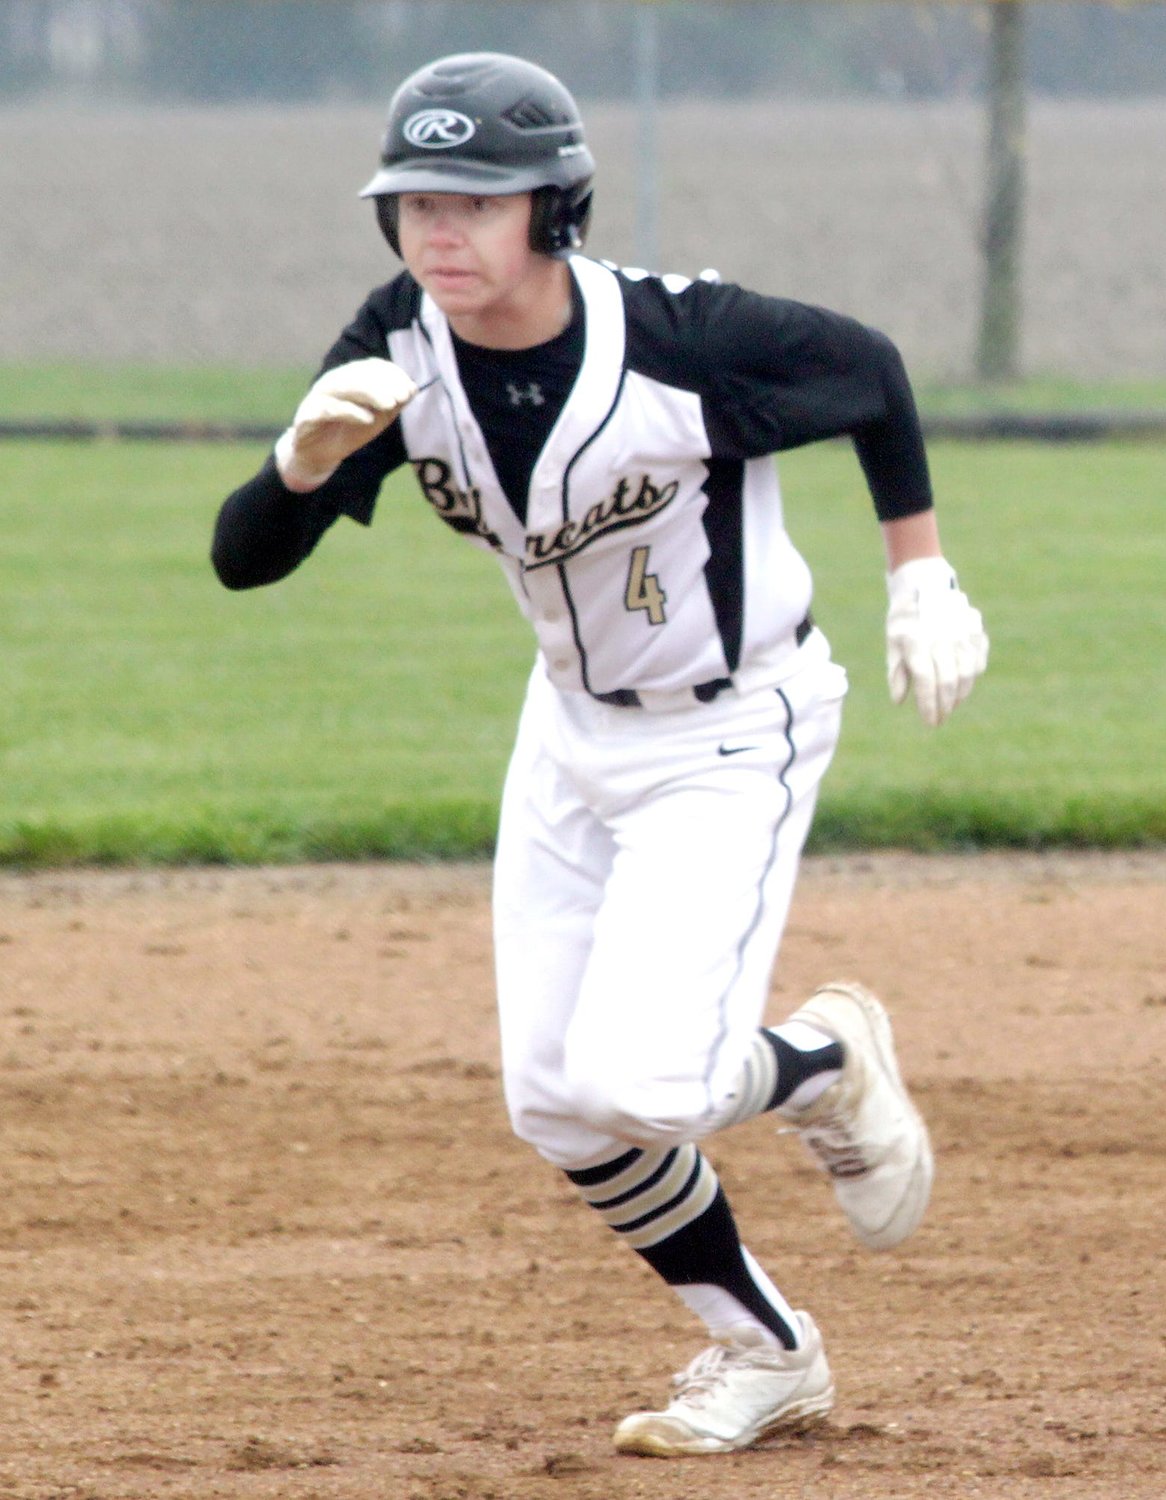 Cairo courtesy runner Koy Ryan jets away from second base when a hit is executed durirng a home baseball game played earlier this season. Ryan and Bearcats team shut out Putnam County winning 5-0 Monday behind the 18 striketous achieved by senior pitcher Bryce Taylor.